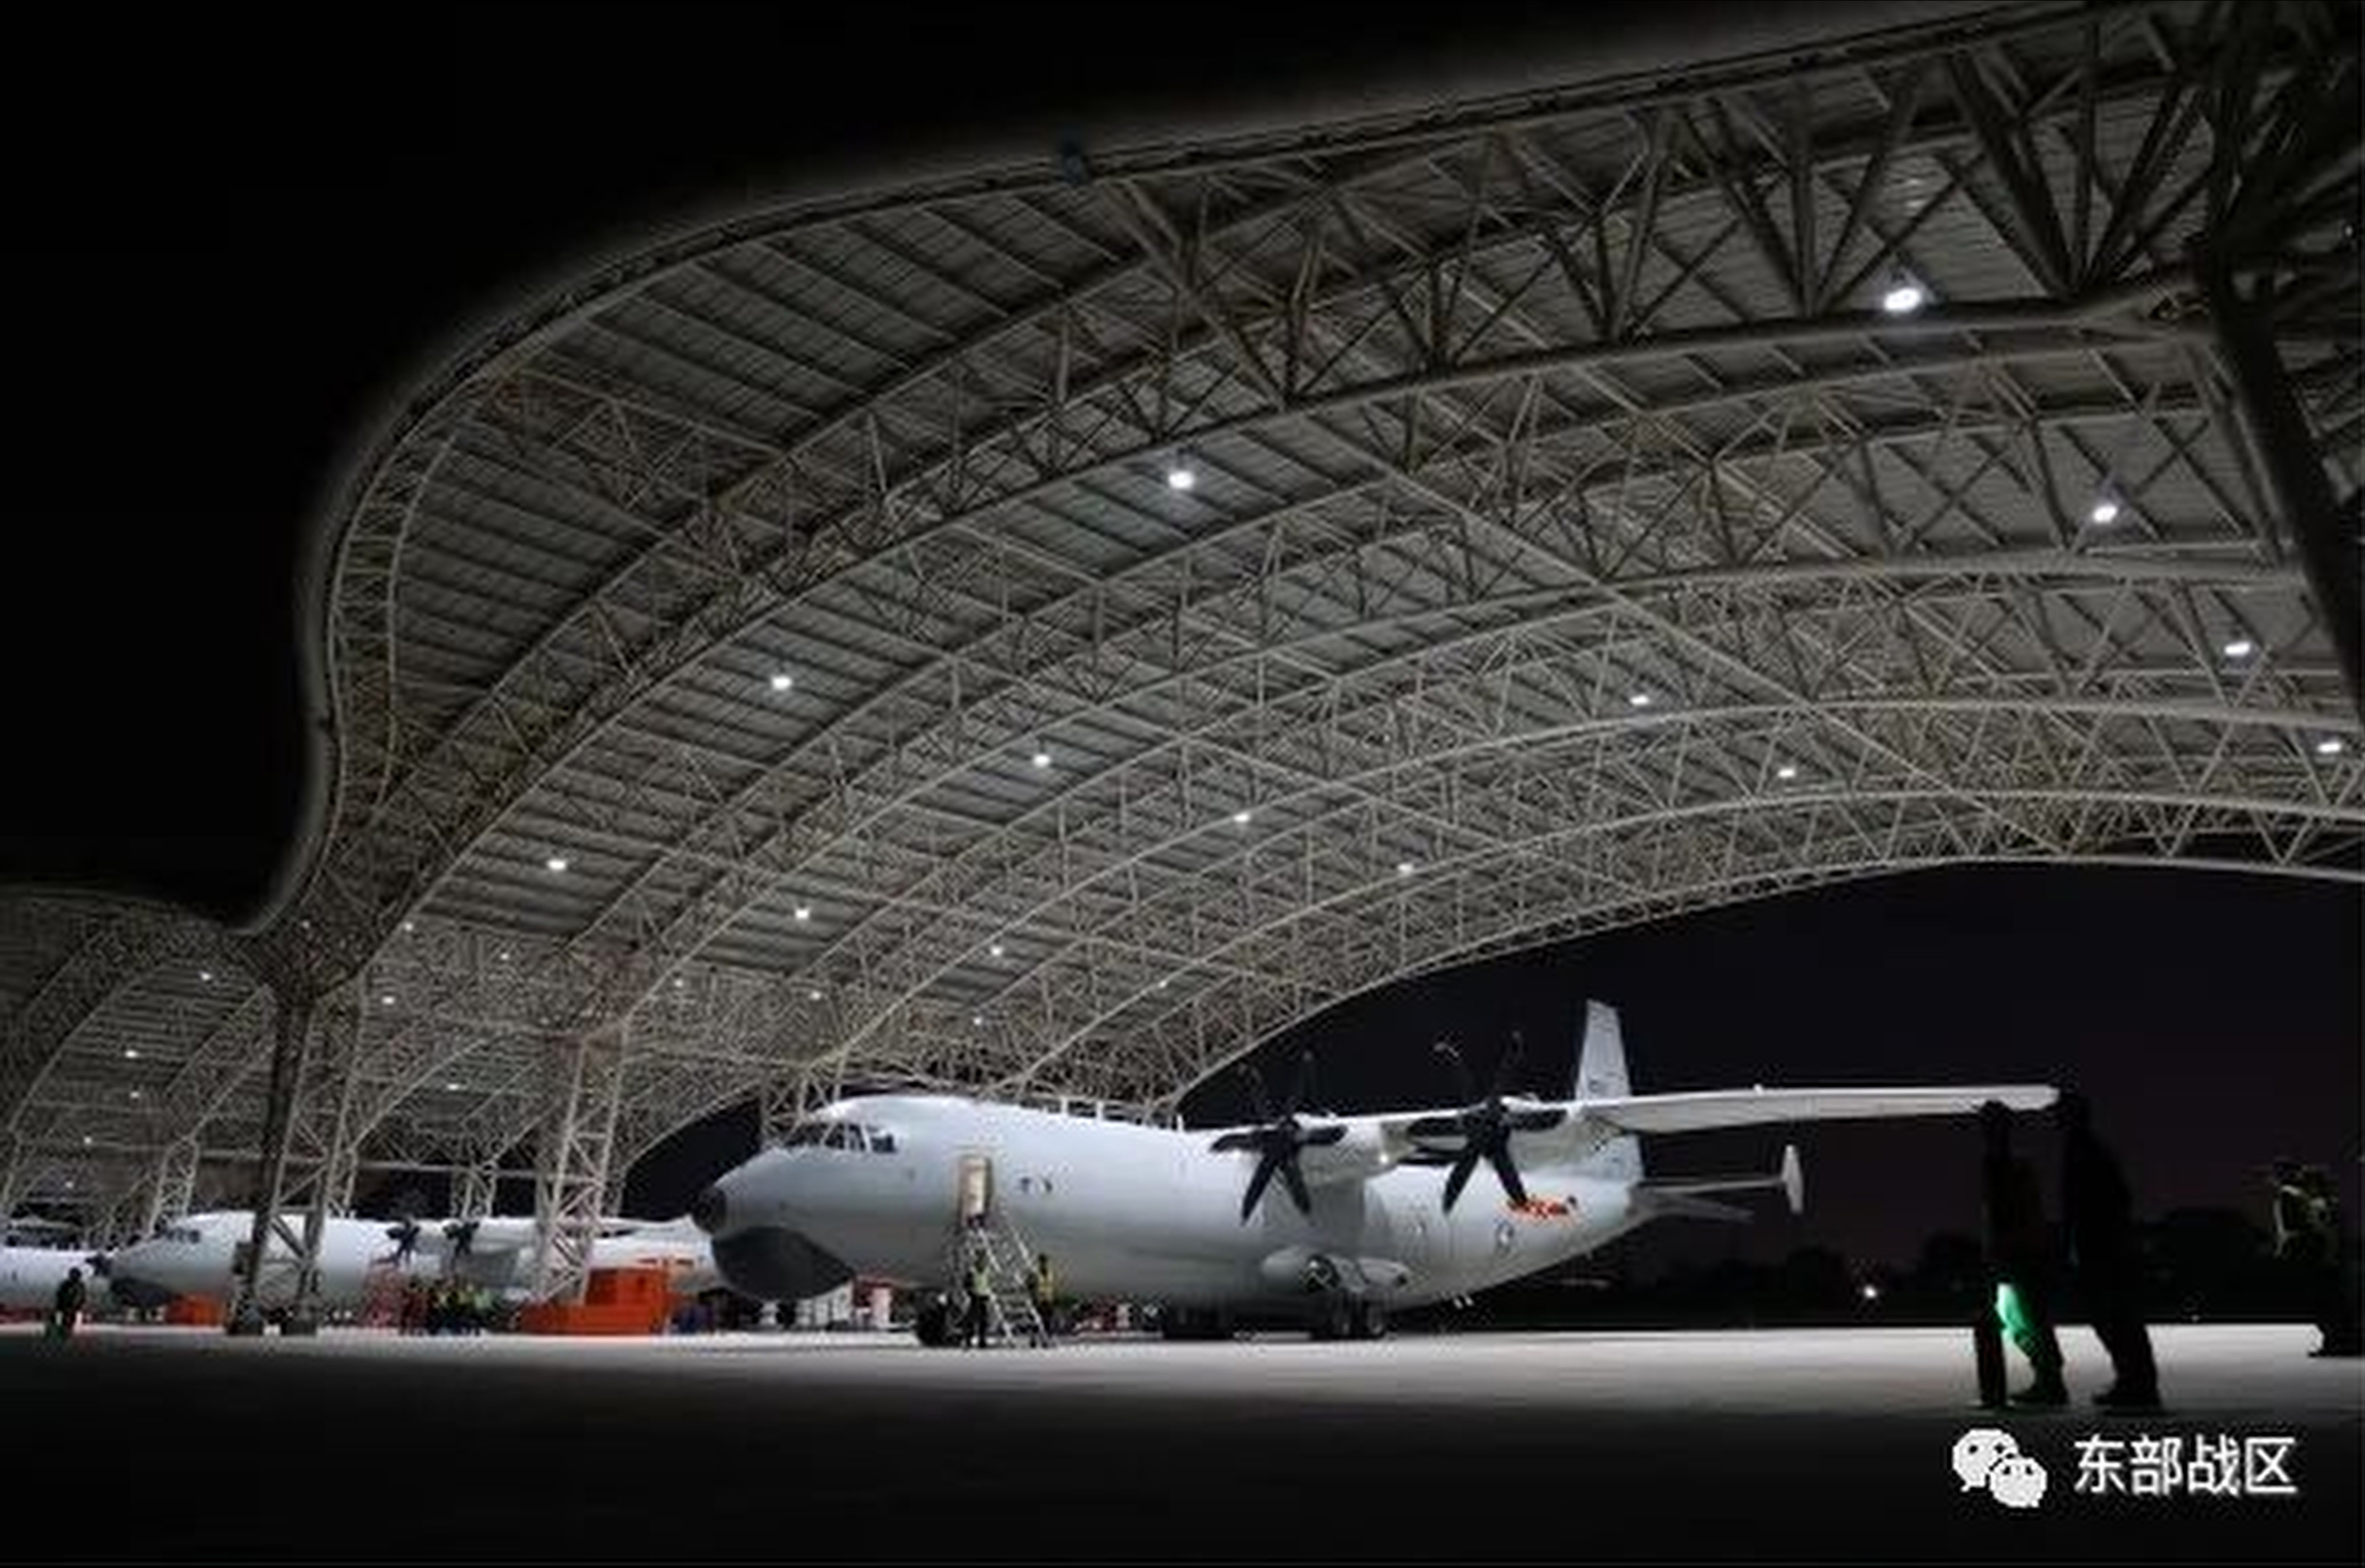 The Shaanxi Y-8 series, based on a Soviet turboprop plane,  is the PLA’s main aircraft for anti-submarine warfare. Photo: qq.com